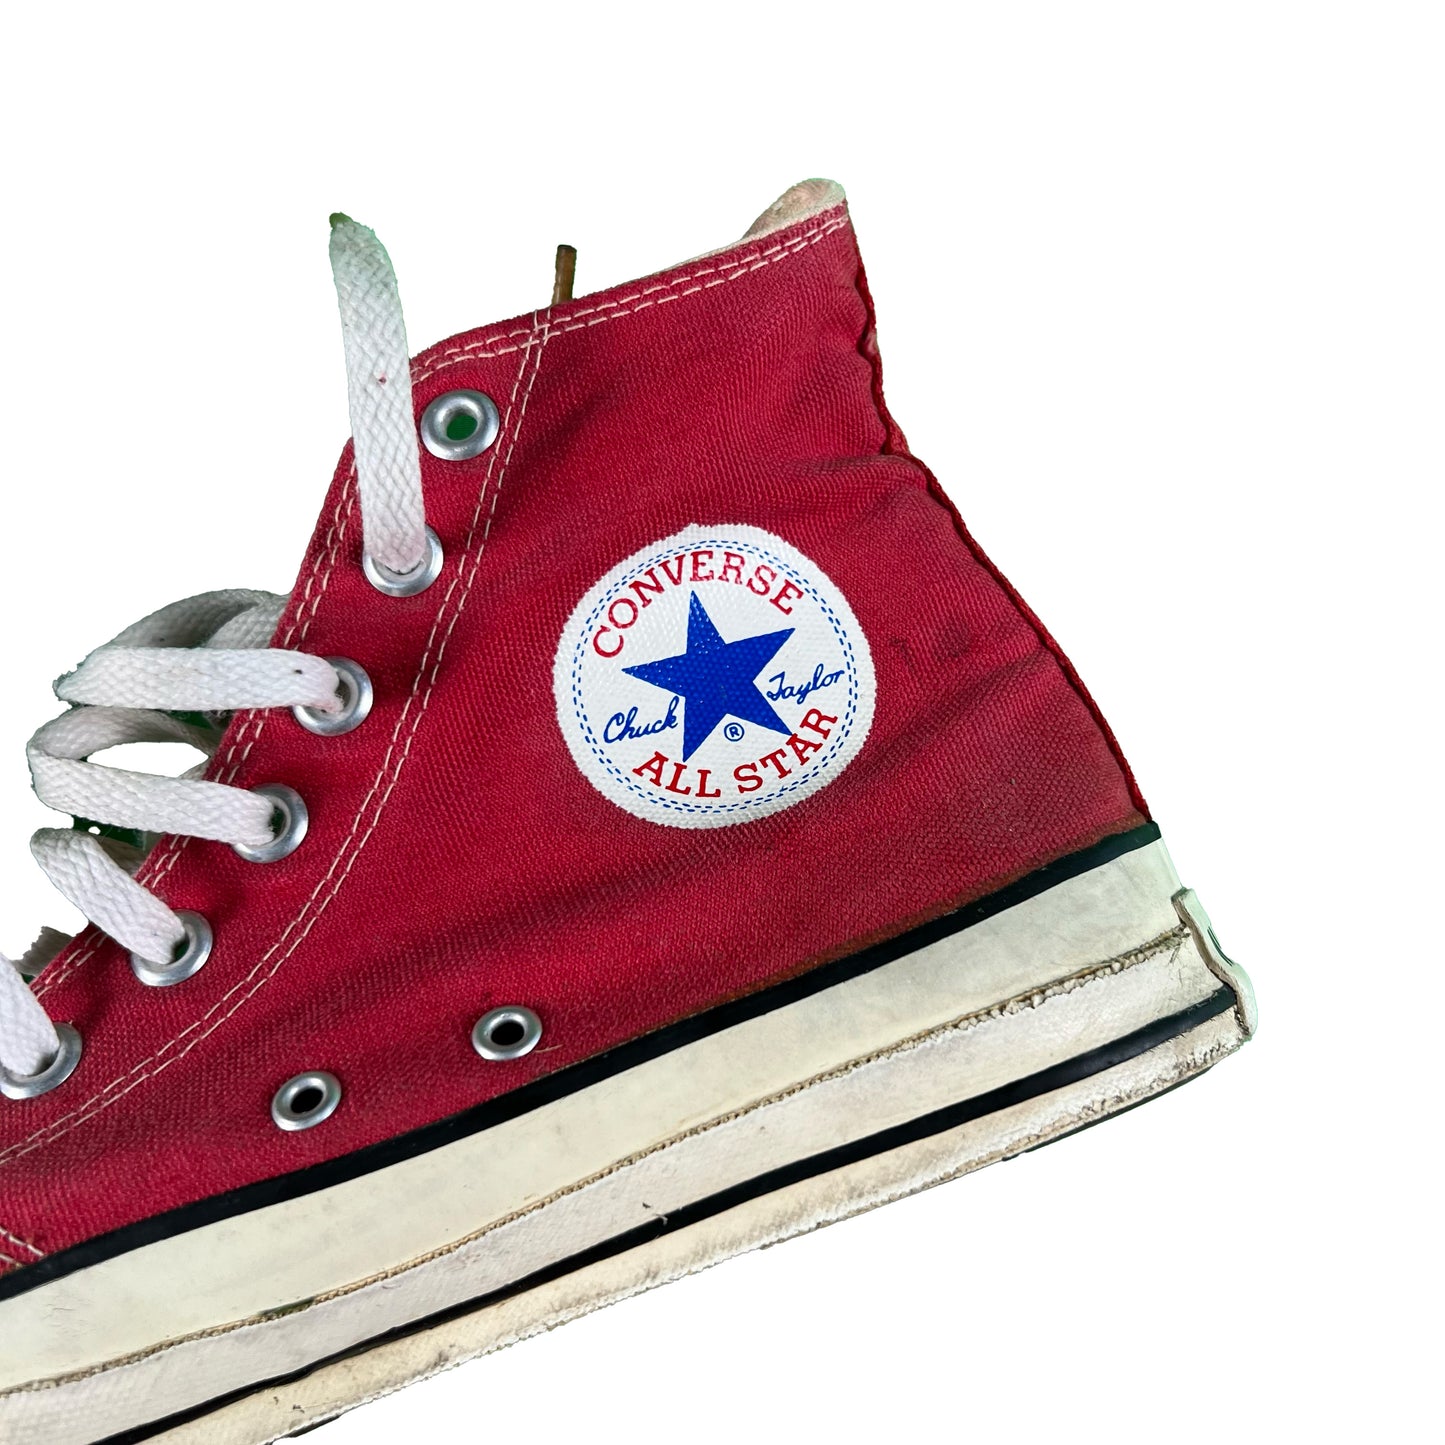 80s Made in USA Converse- M's 8, W's 9.5